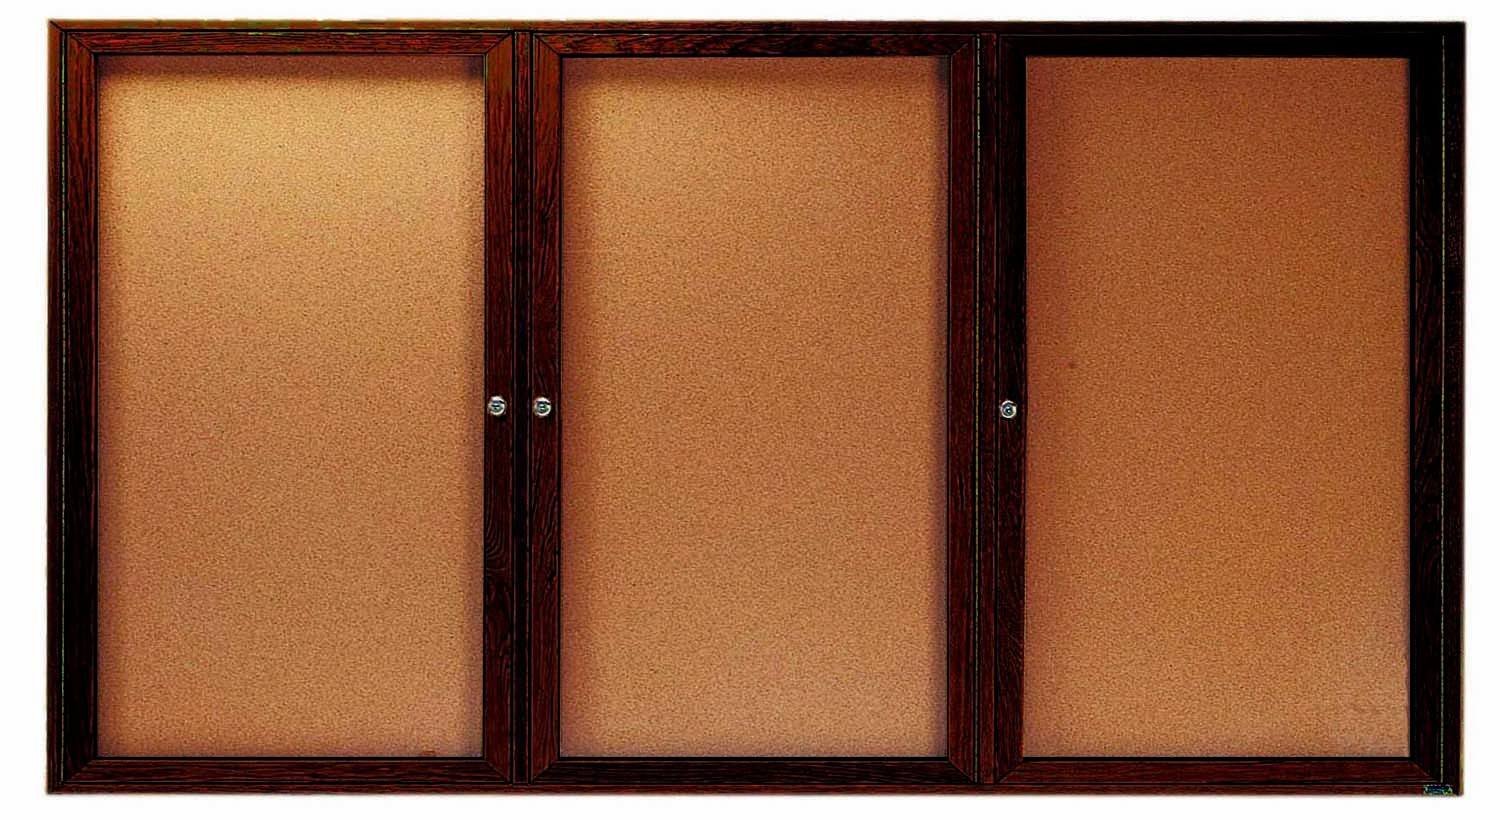 Aarco Products WBC4896-3R 3-Door Enclosed Bulletin Board with Cherry Finish and Header, 96"W x 48"H